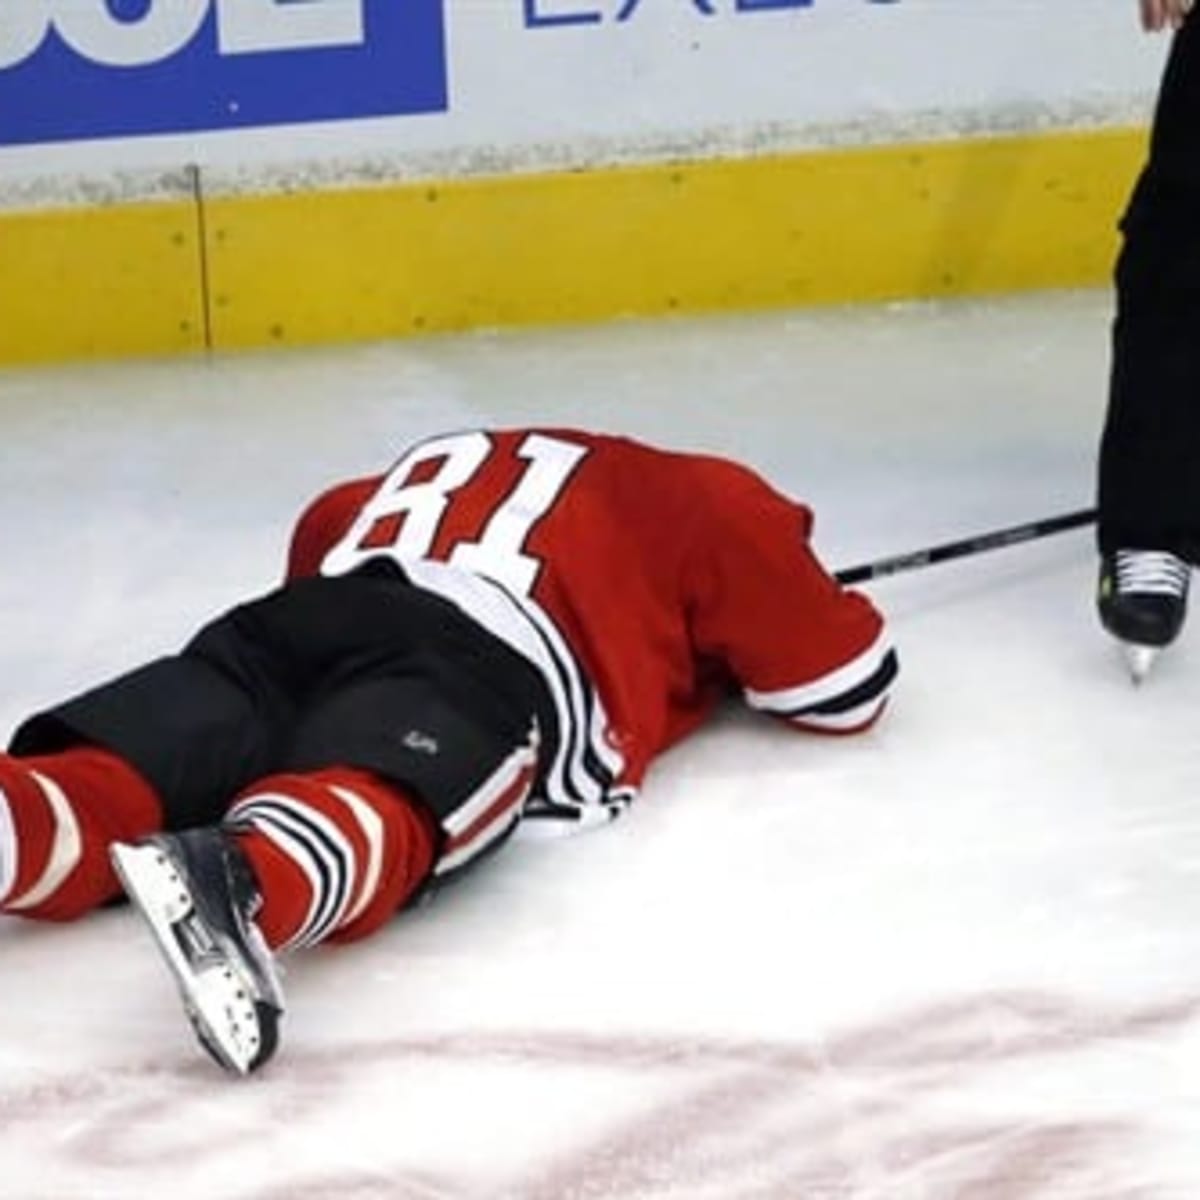 Marian Hossa leaves game on stretcher, then needs ambulance - NBC